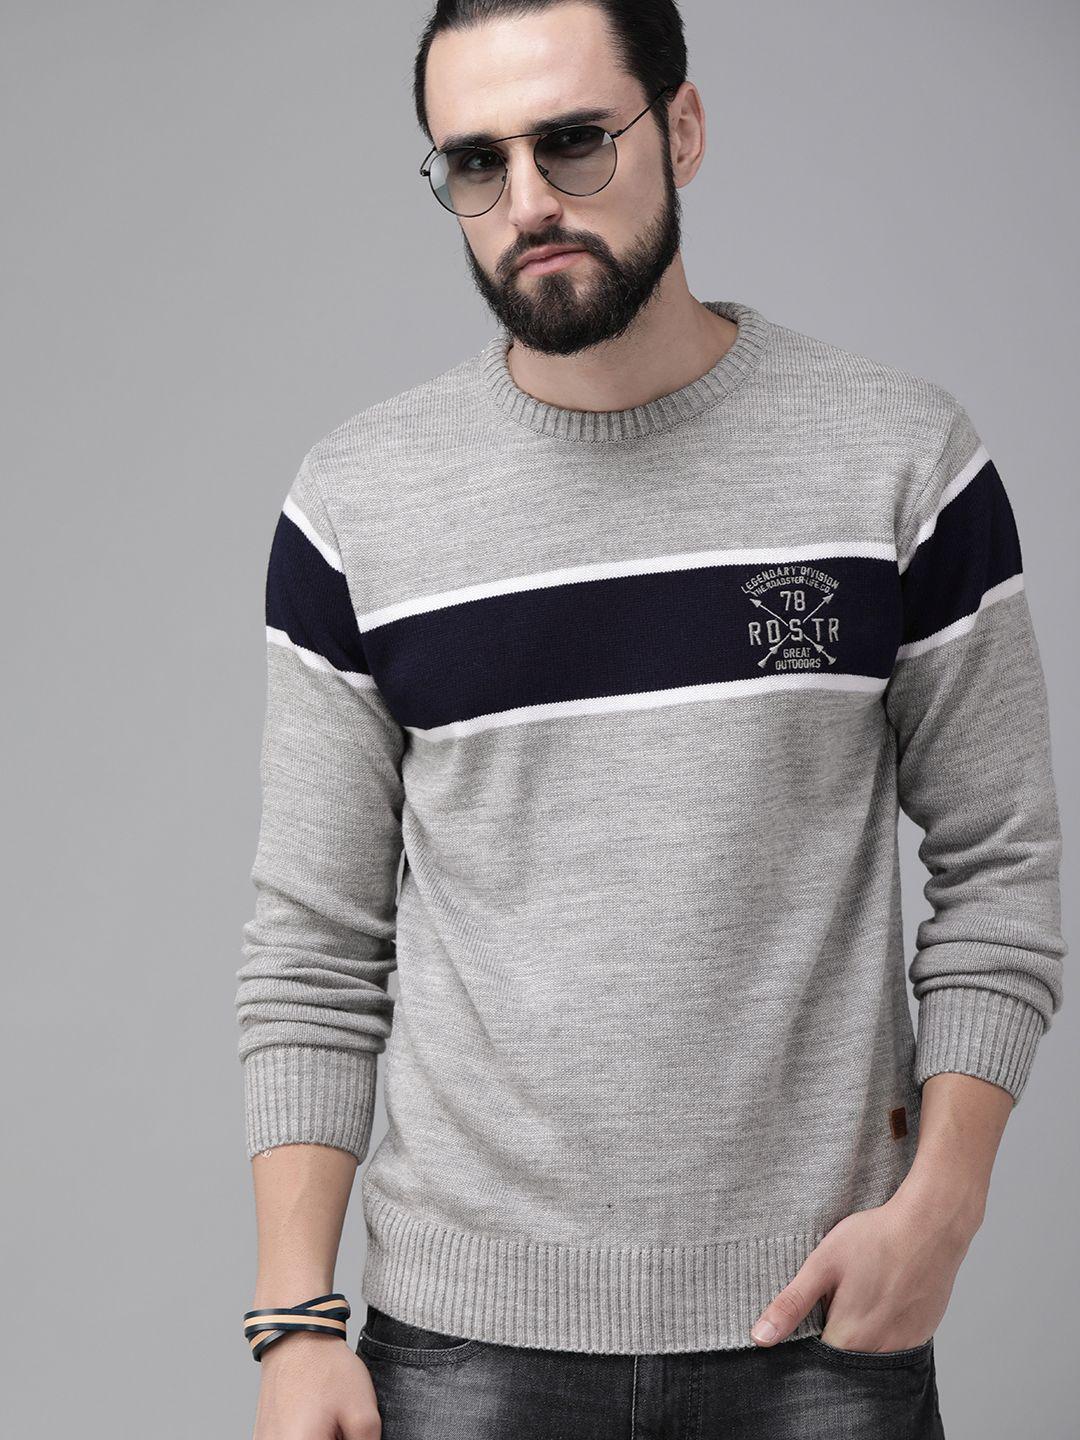 the roadster lifestyle co men grey & navy blue striped pullover sweater